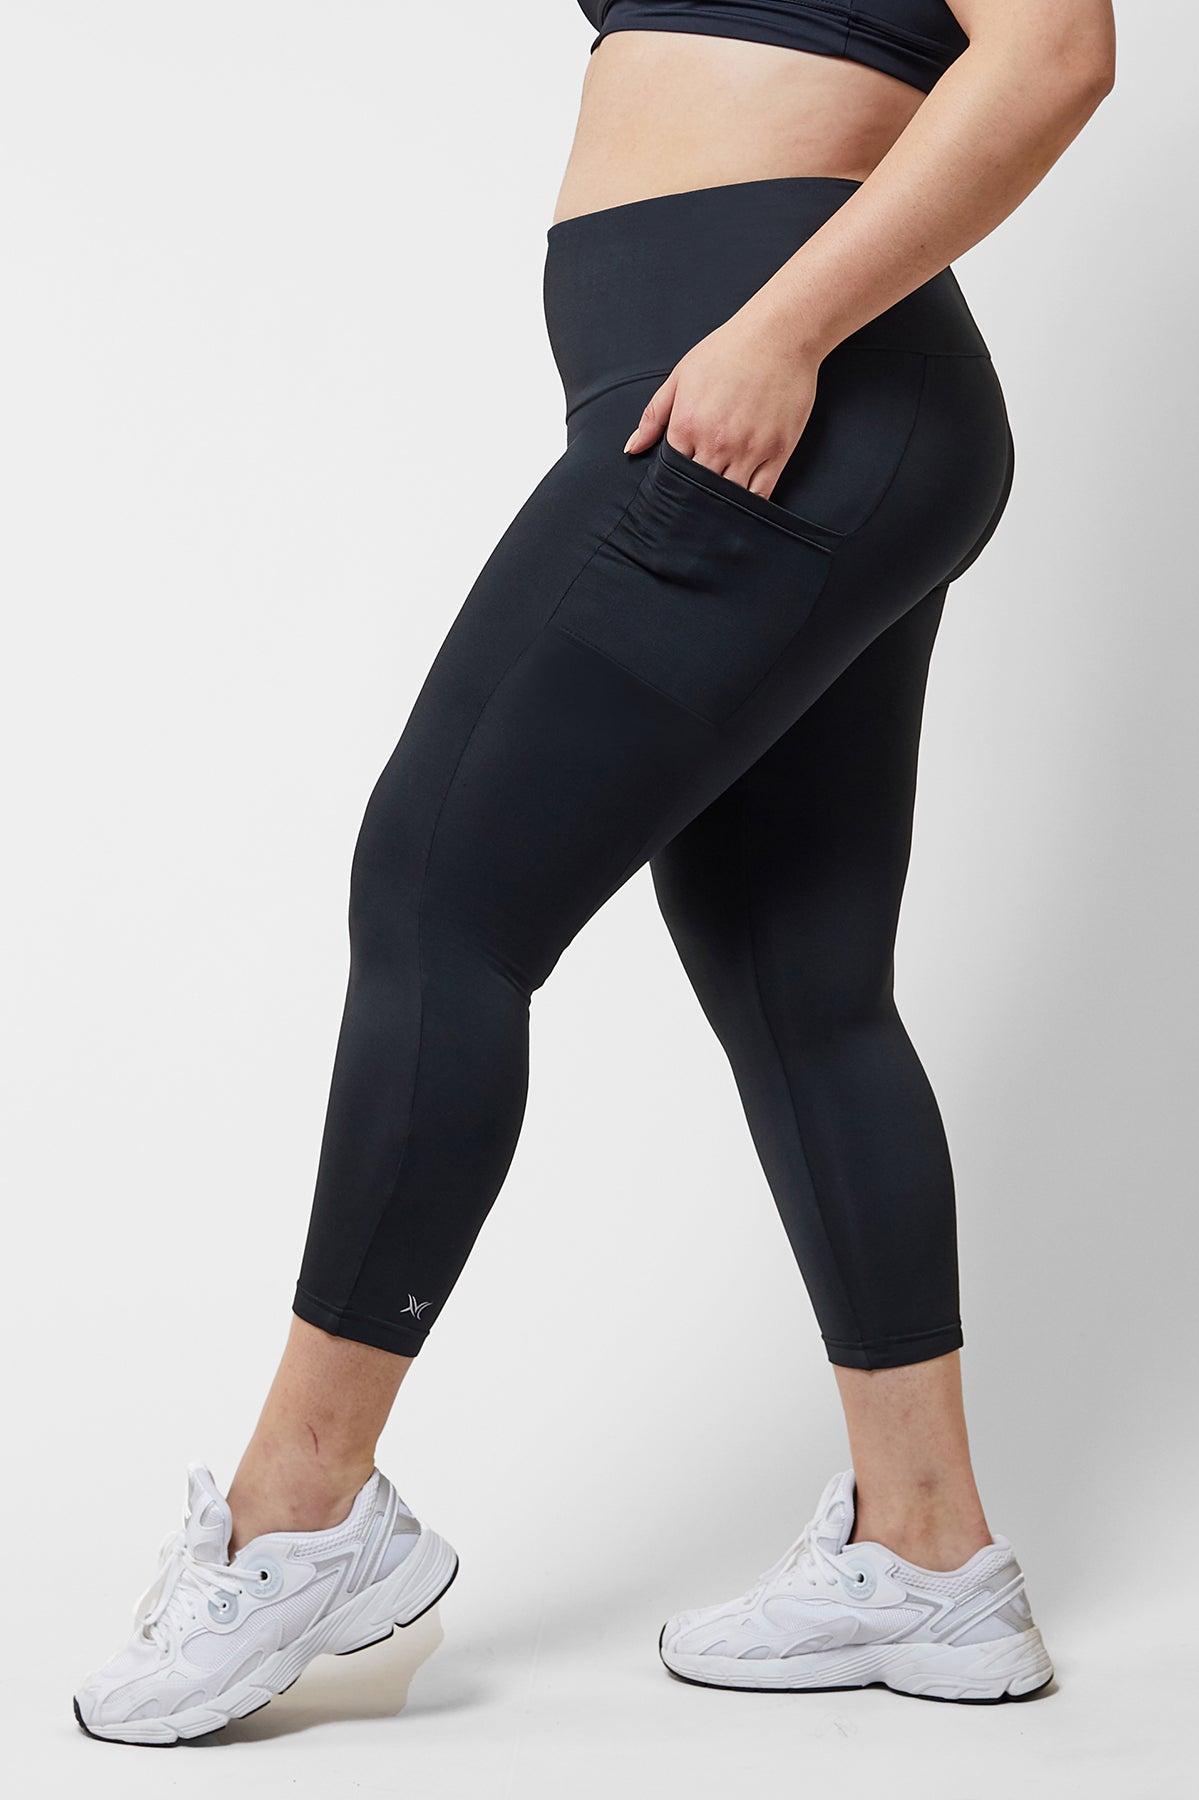  Plus Size Leggings For Women-Stretchy X-Large-4X